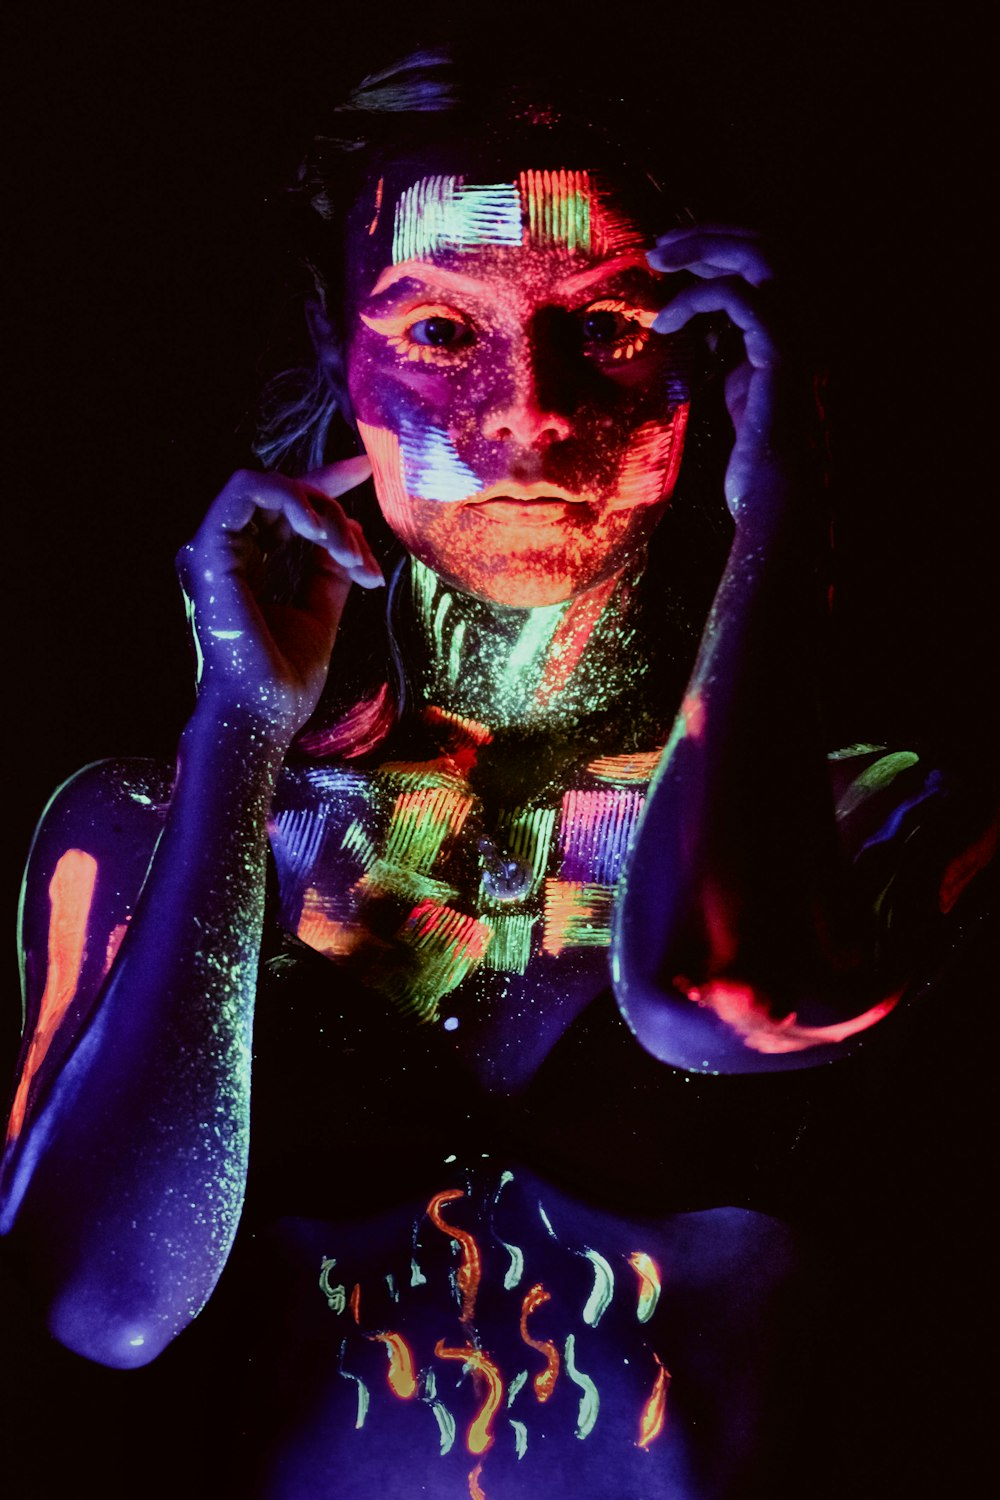 woman with neon paint on face